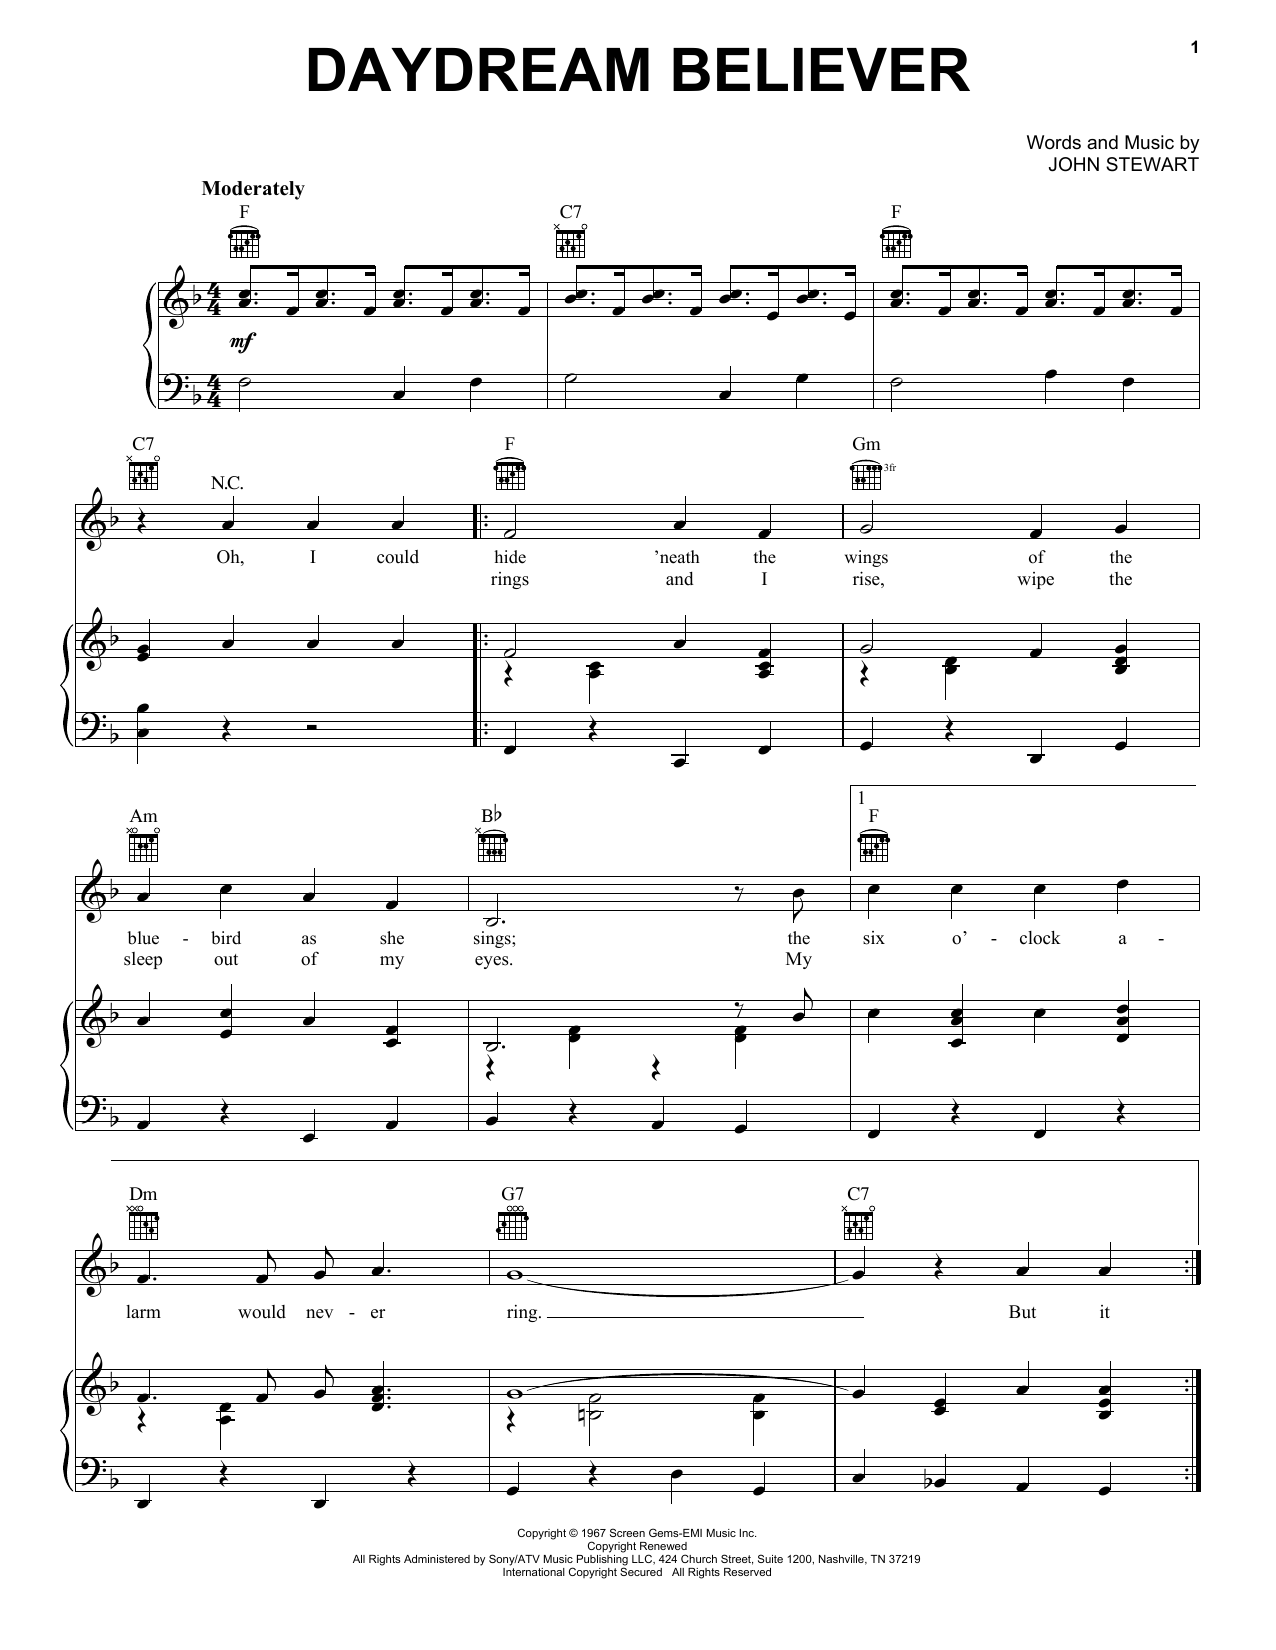 Download The Monkees Daydream Believer Sheet Music